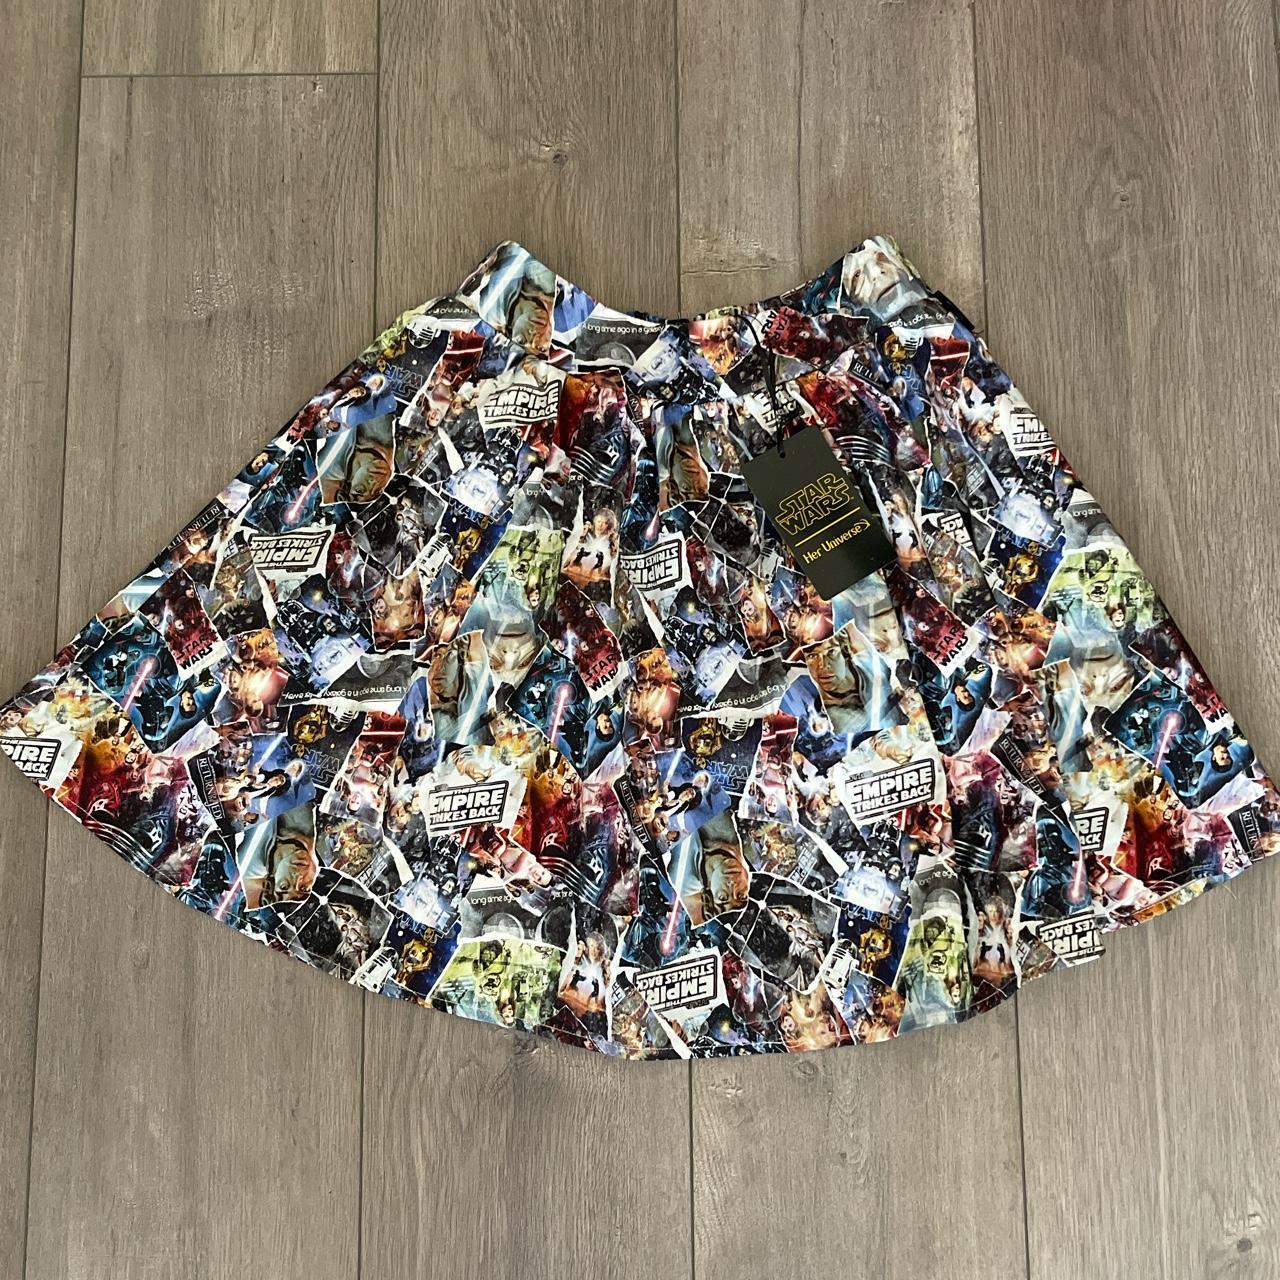 Disney her universe leggings about the - Depop